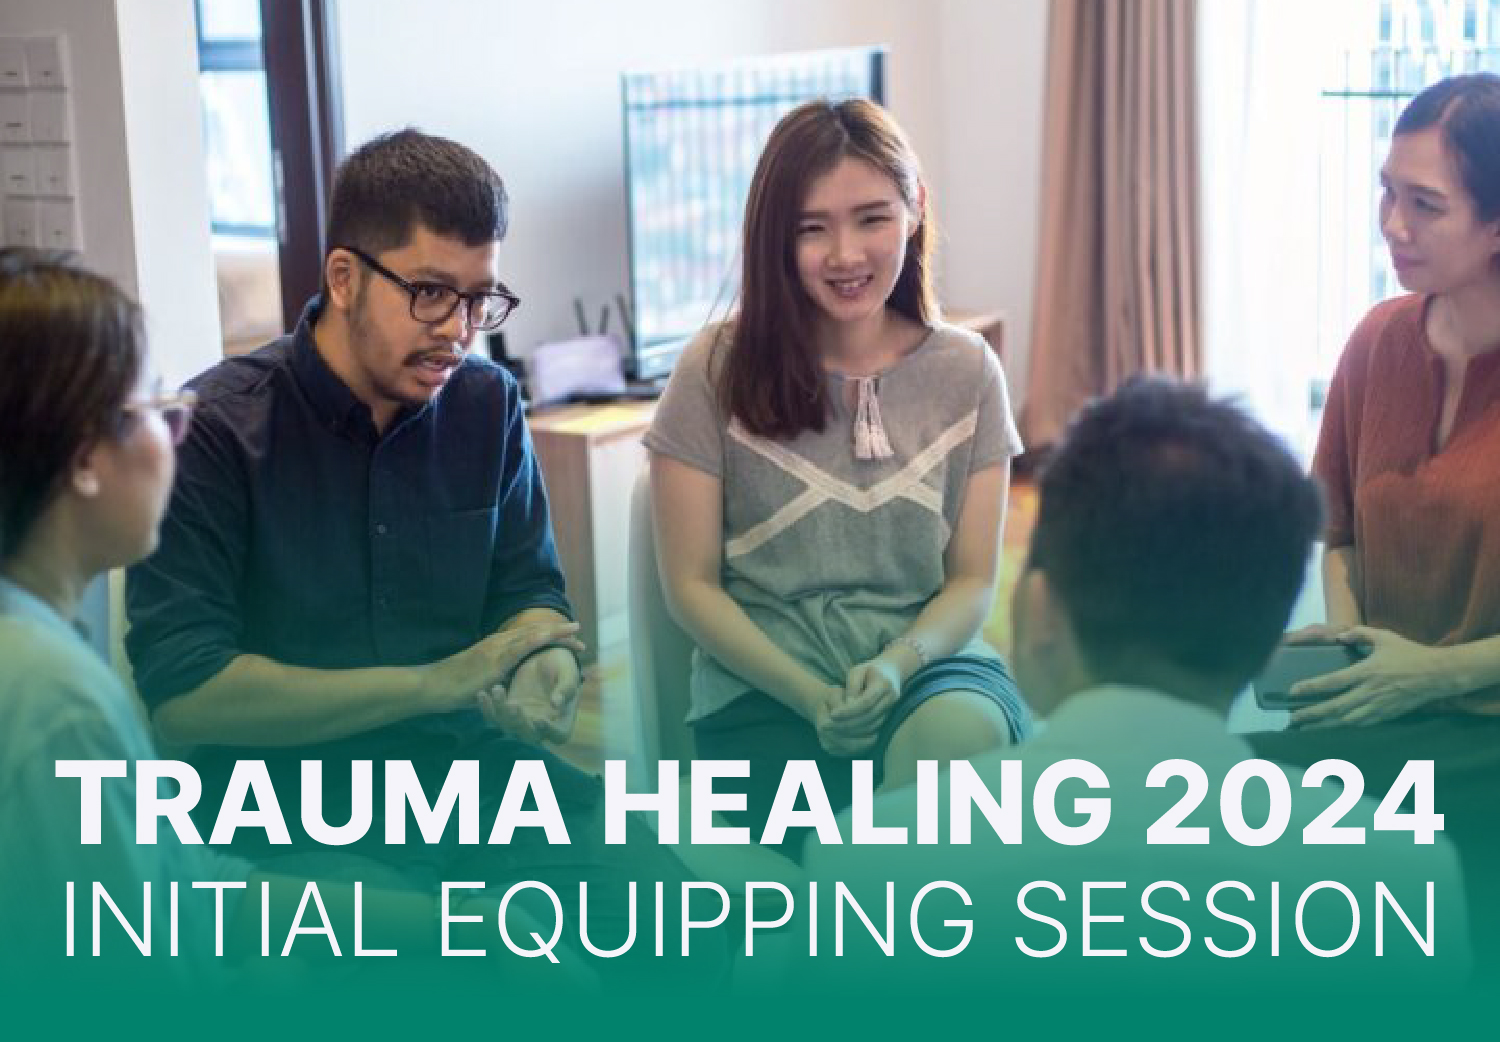 Trauma Healing - Initial Equipping Session